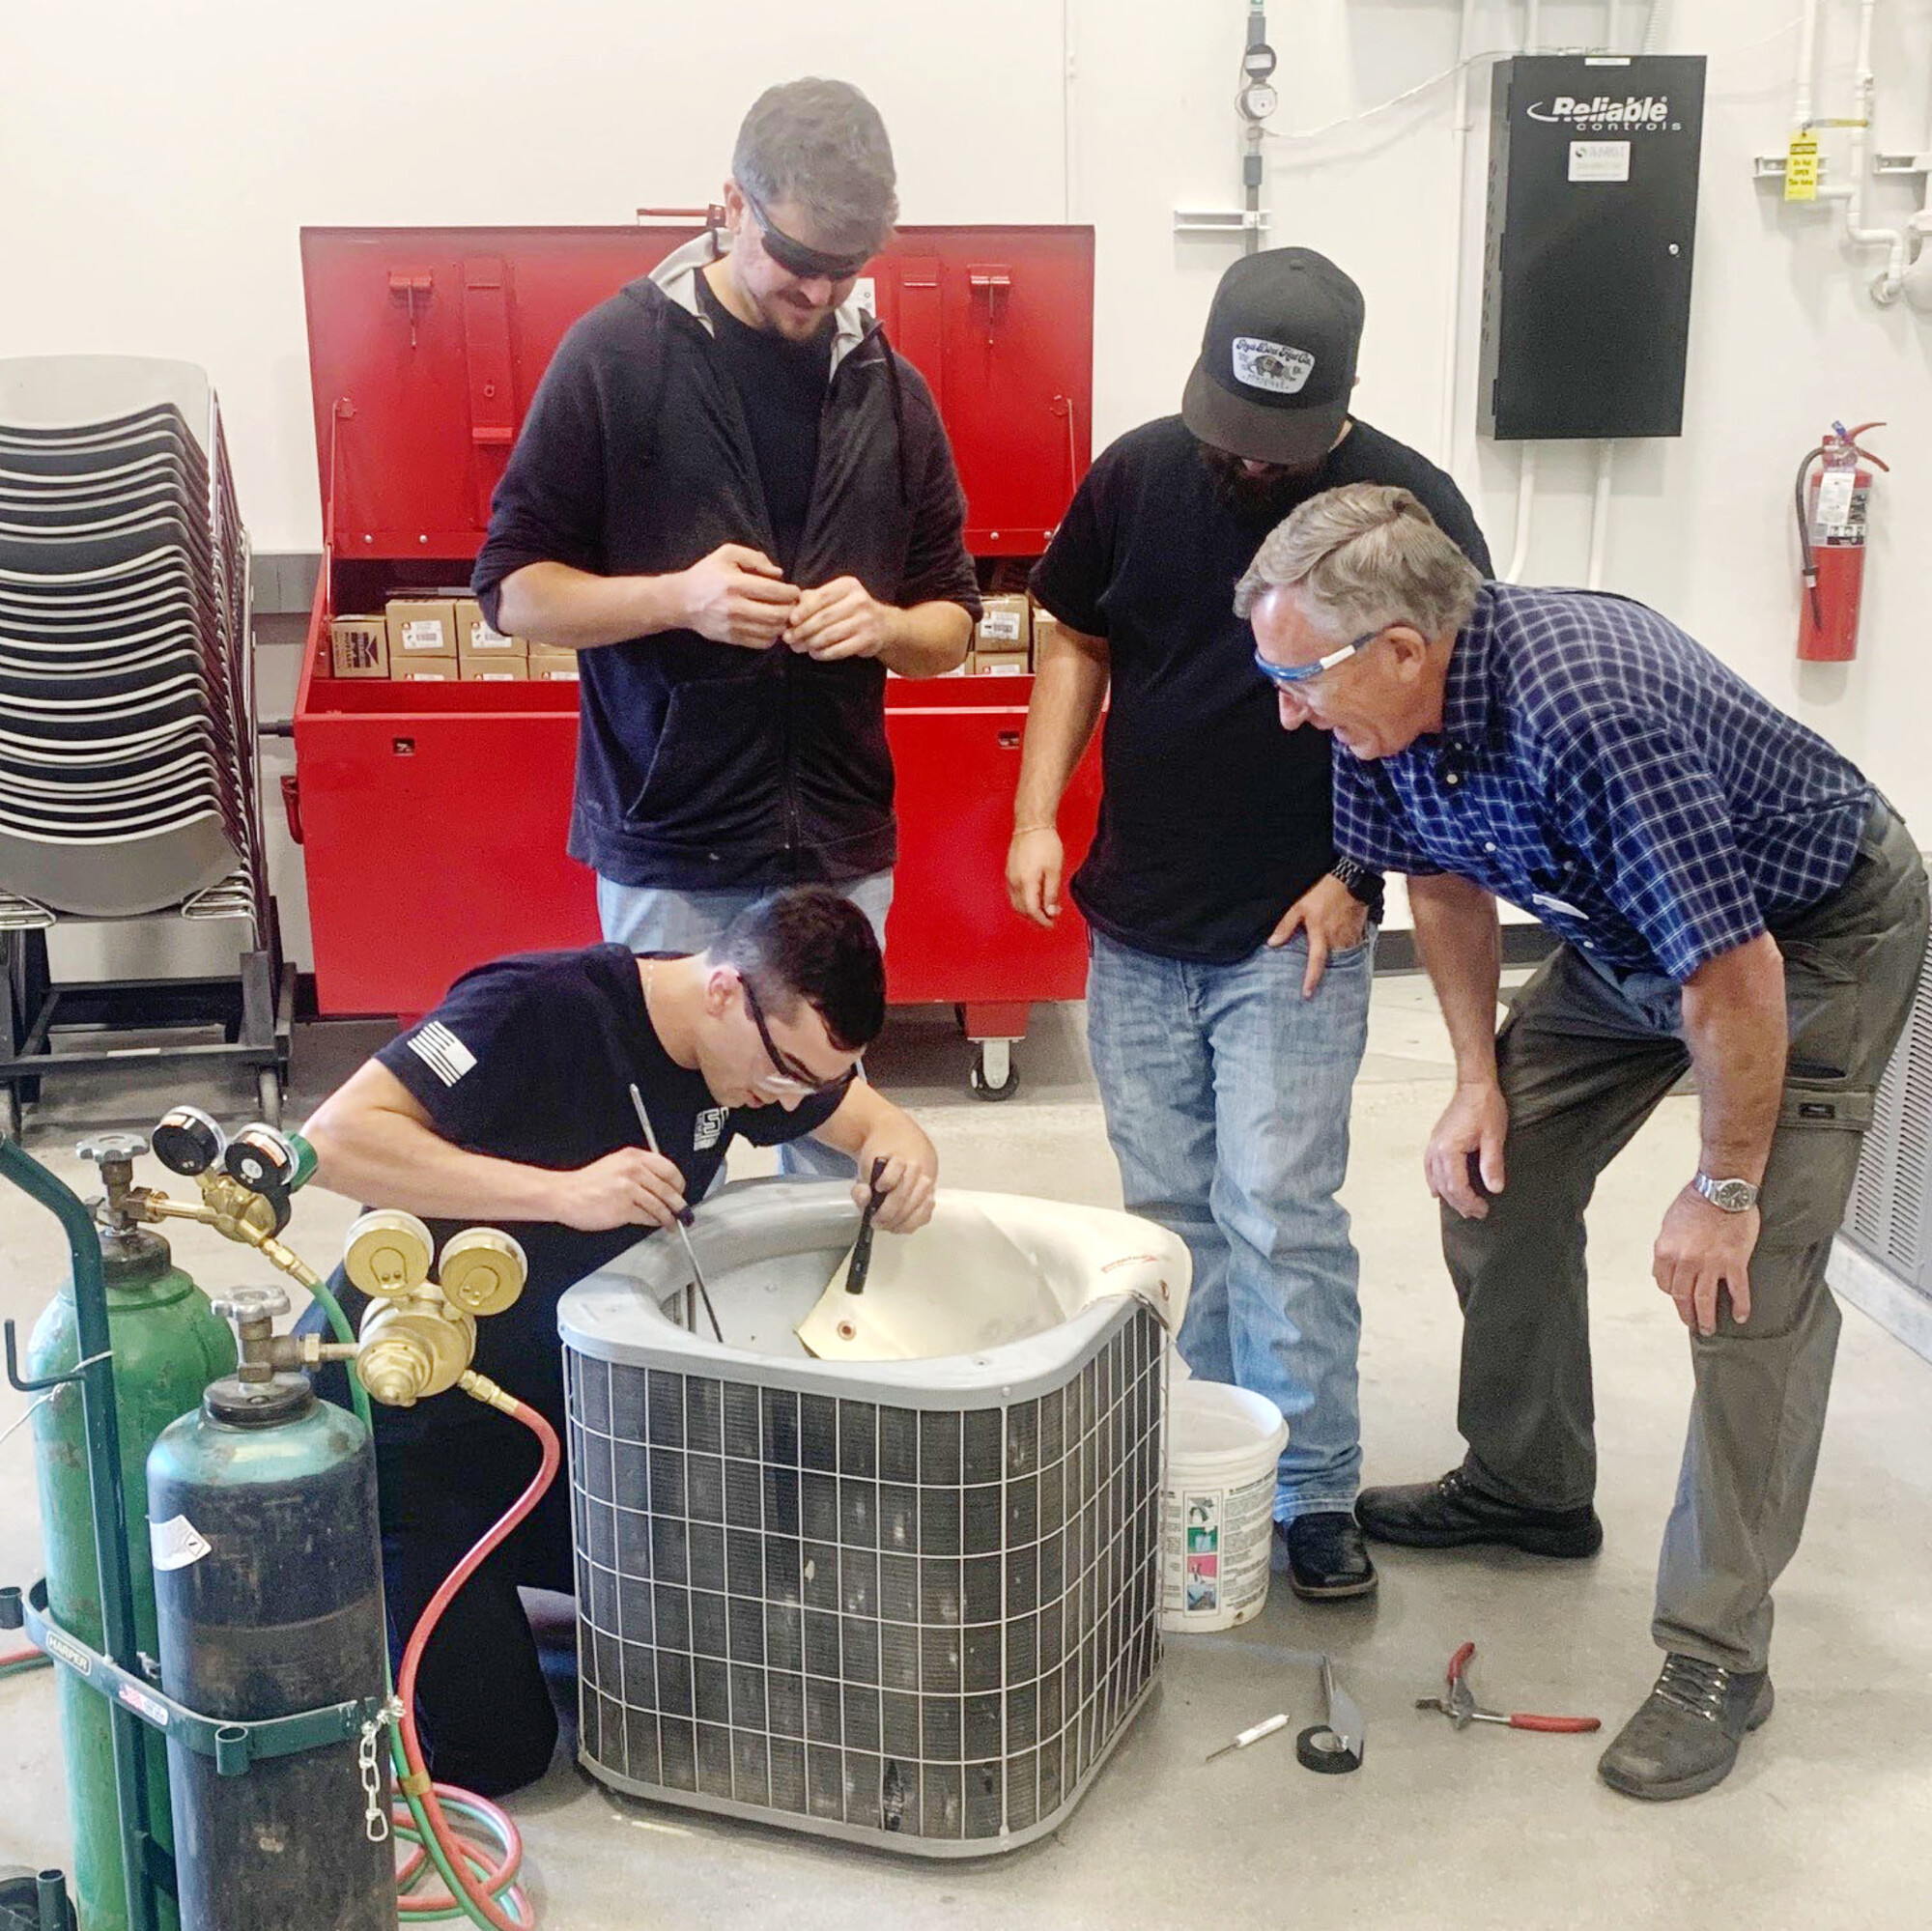 Students learn how to repair an air conditioning unit from an instructor.